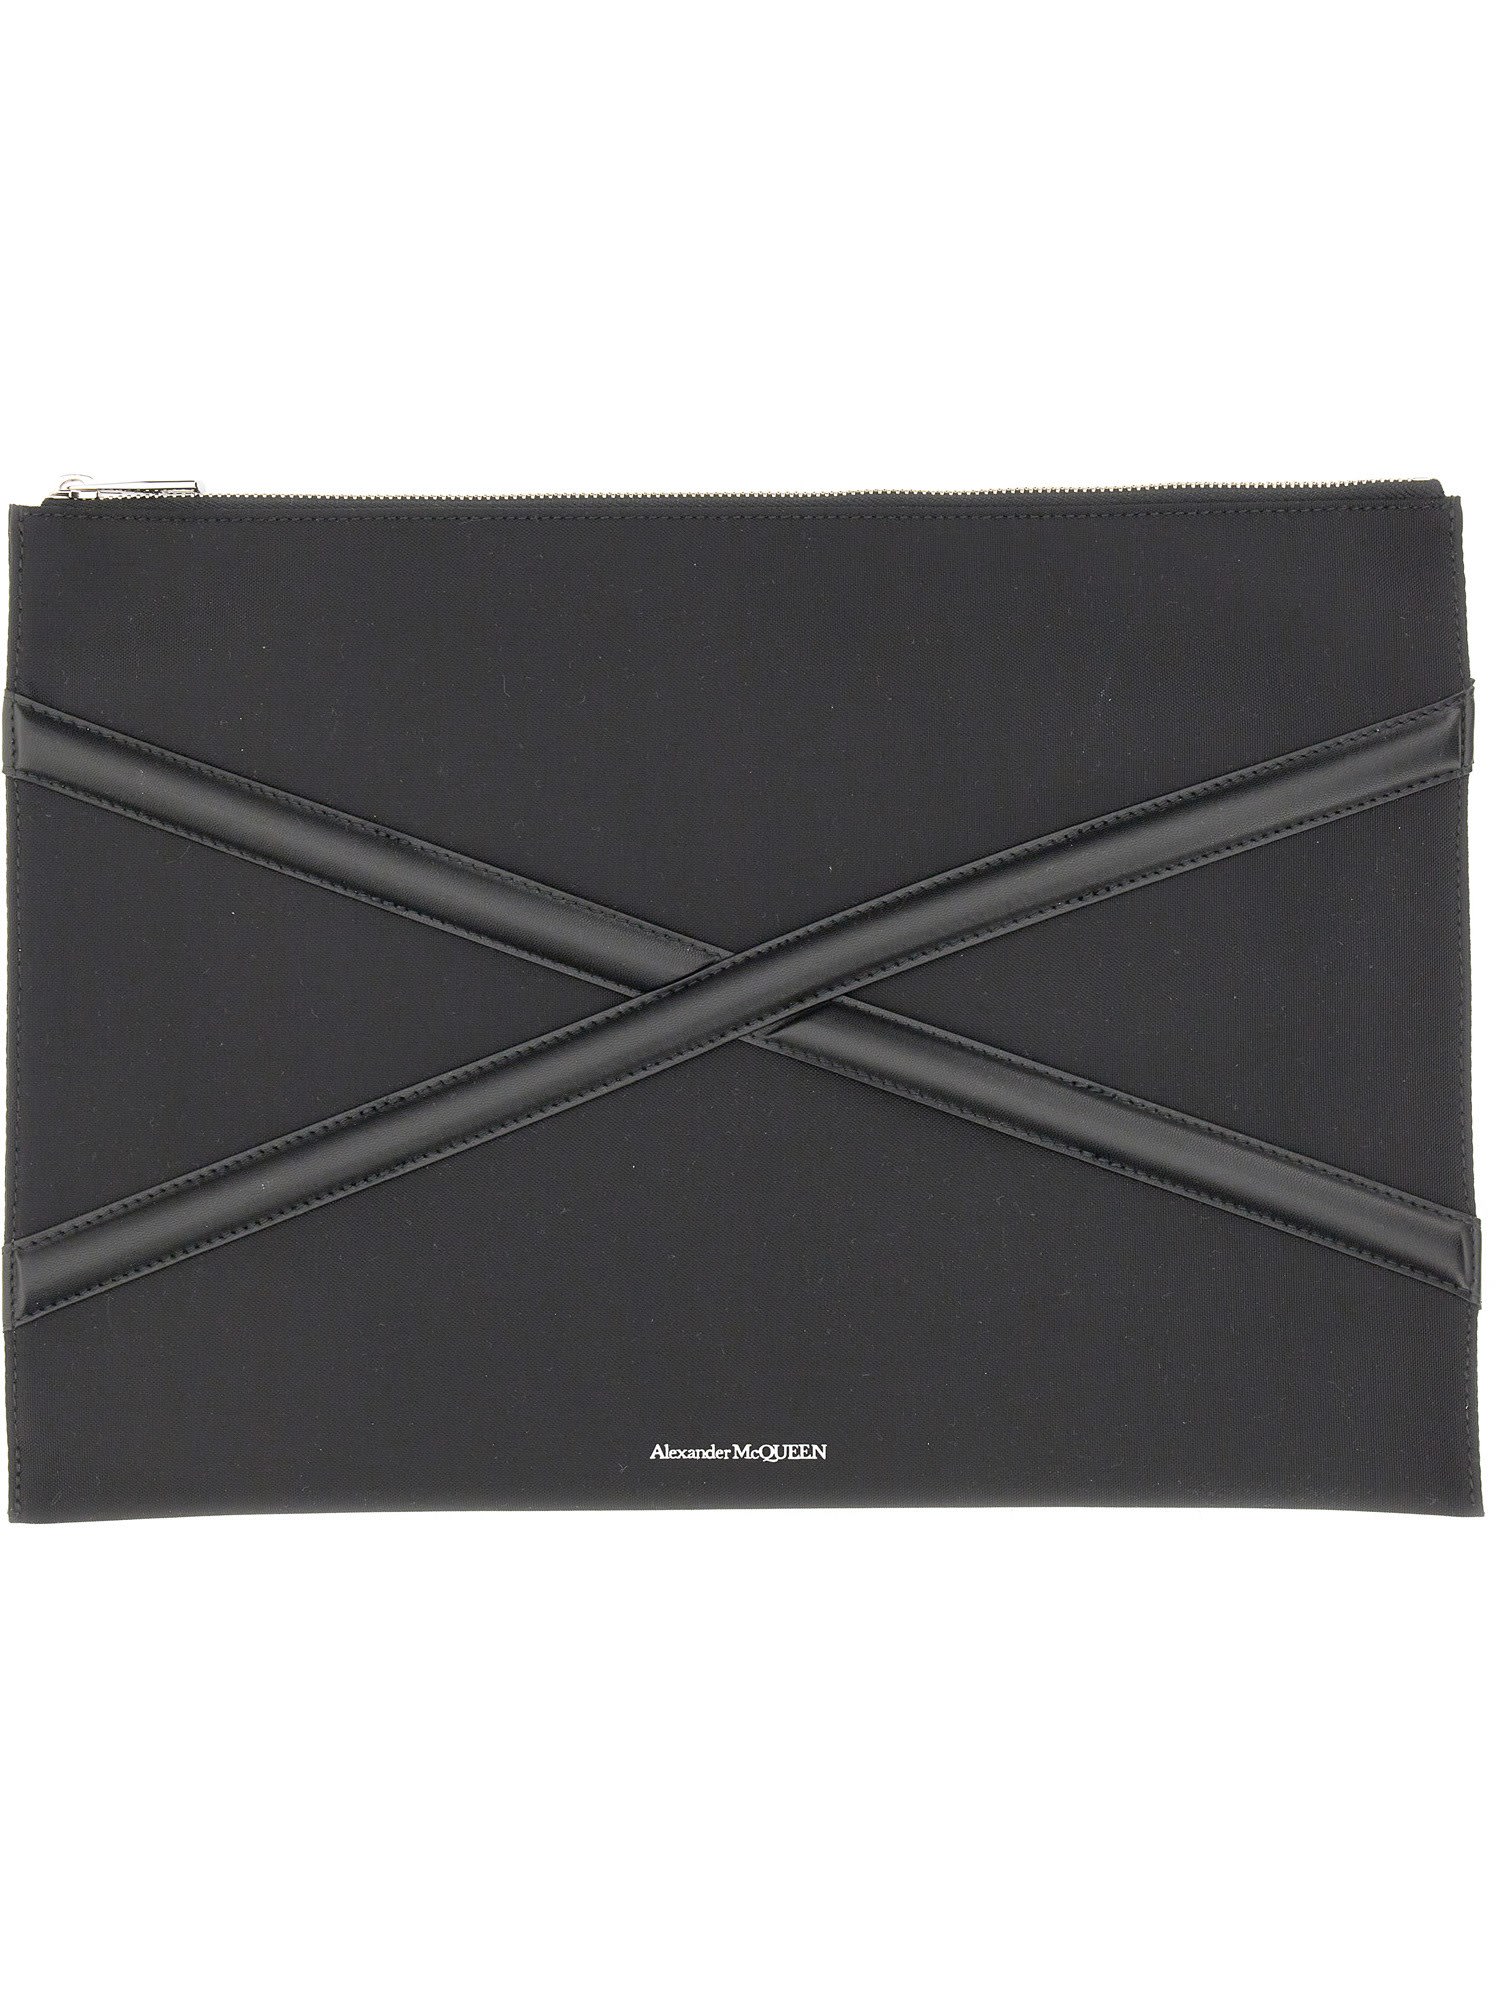 Alexander McQueen - Black Soft Leather Knuckle Pouch